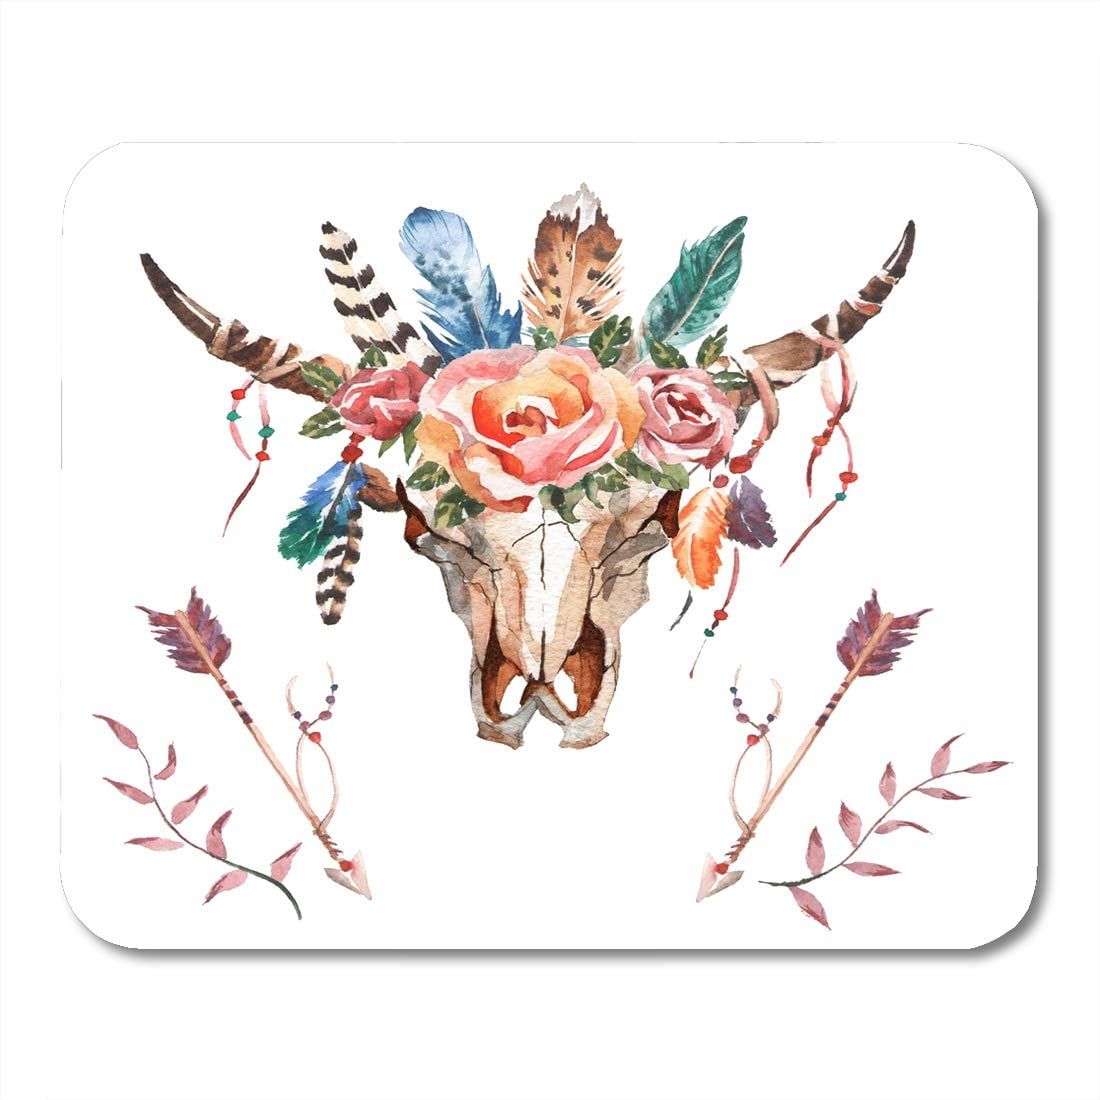 Non-Slip Rubber Mouse Pad for Desktop Laptop Accessories Bohemian Watercolor Bull Head Flowers Feathers On Boho Cow Bison Gaming Mouse Pad